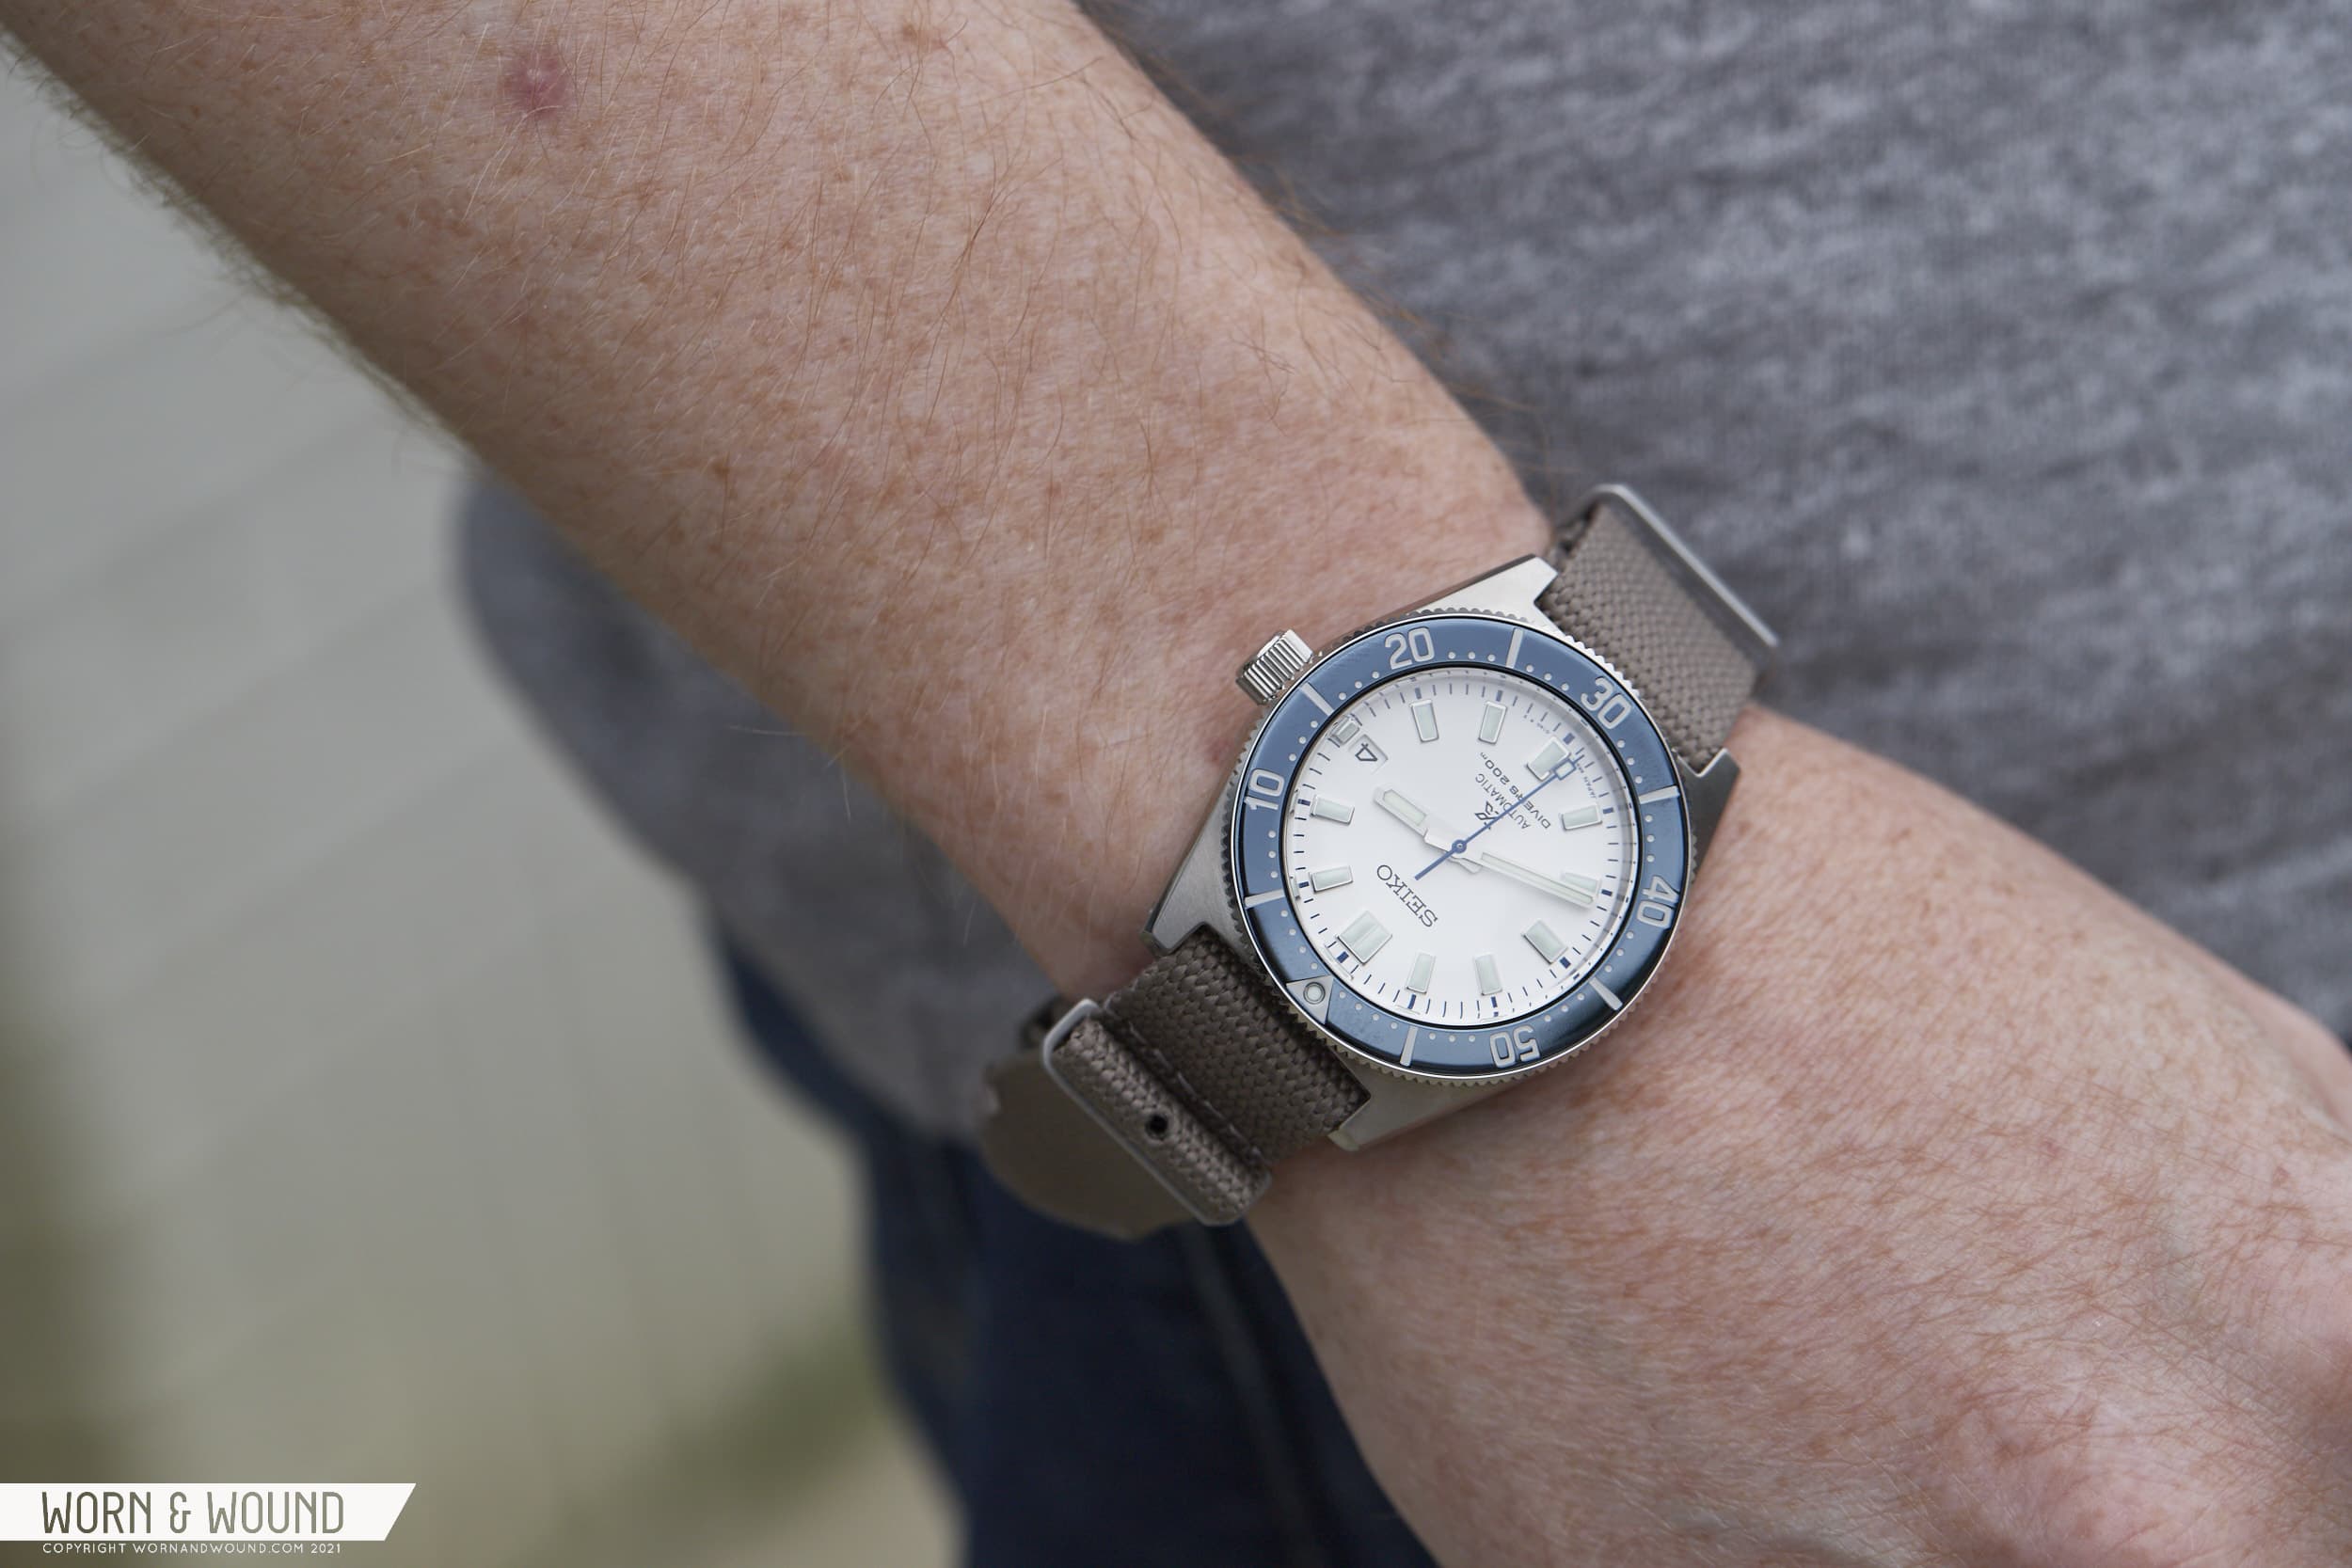 Hands-On With The 140th Anniversary Seiko SPB213